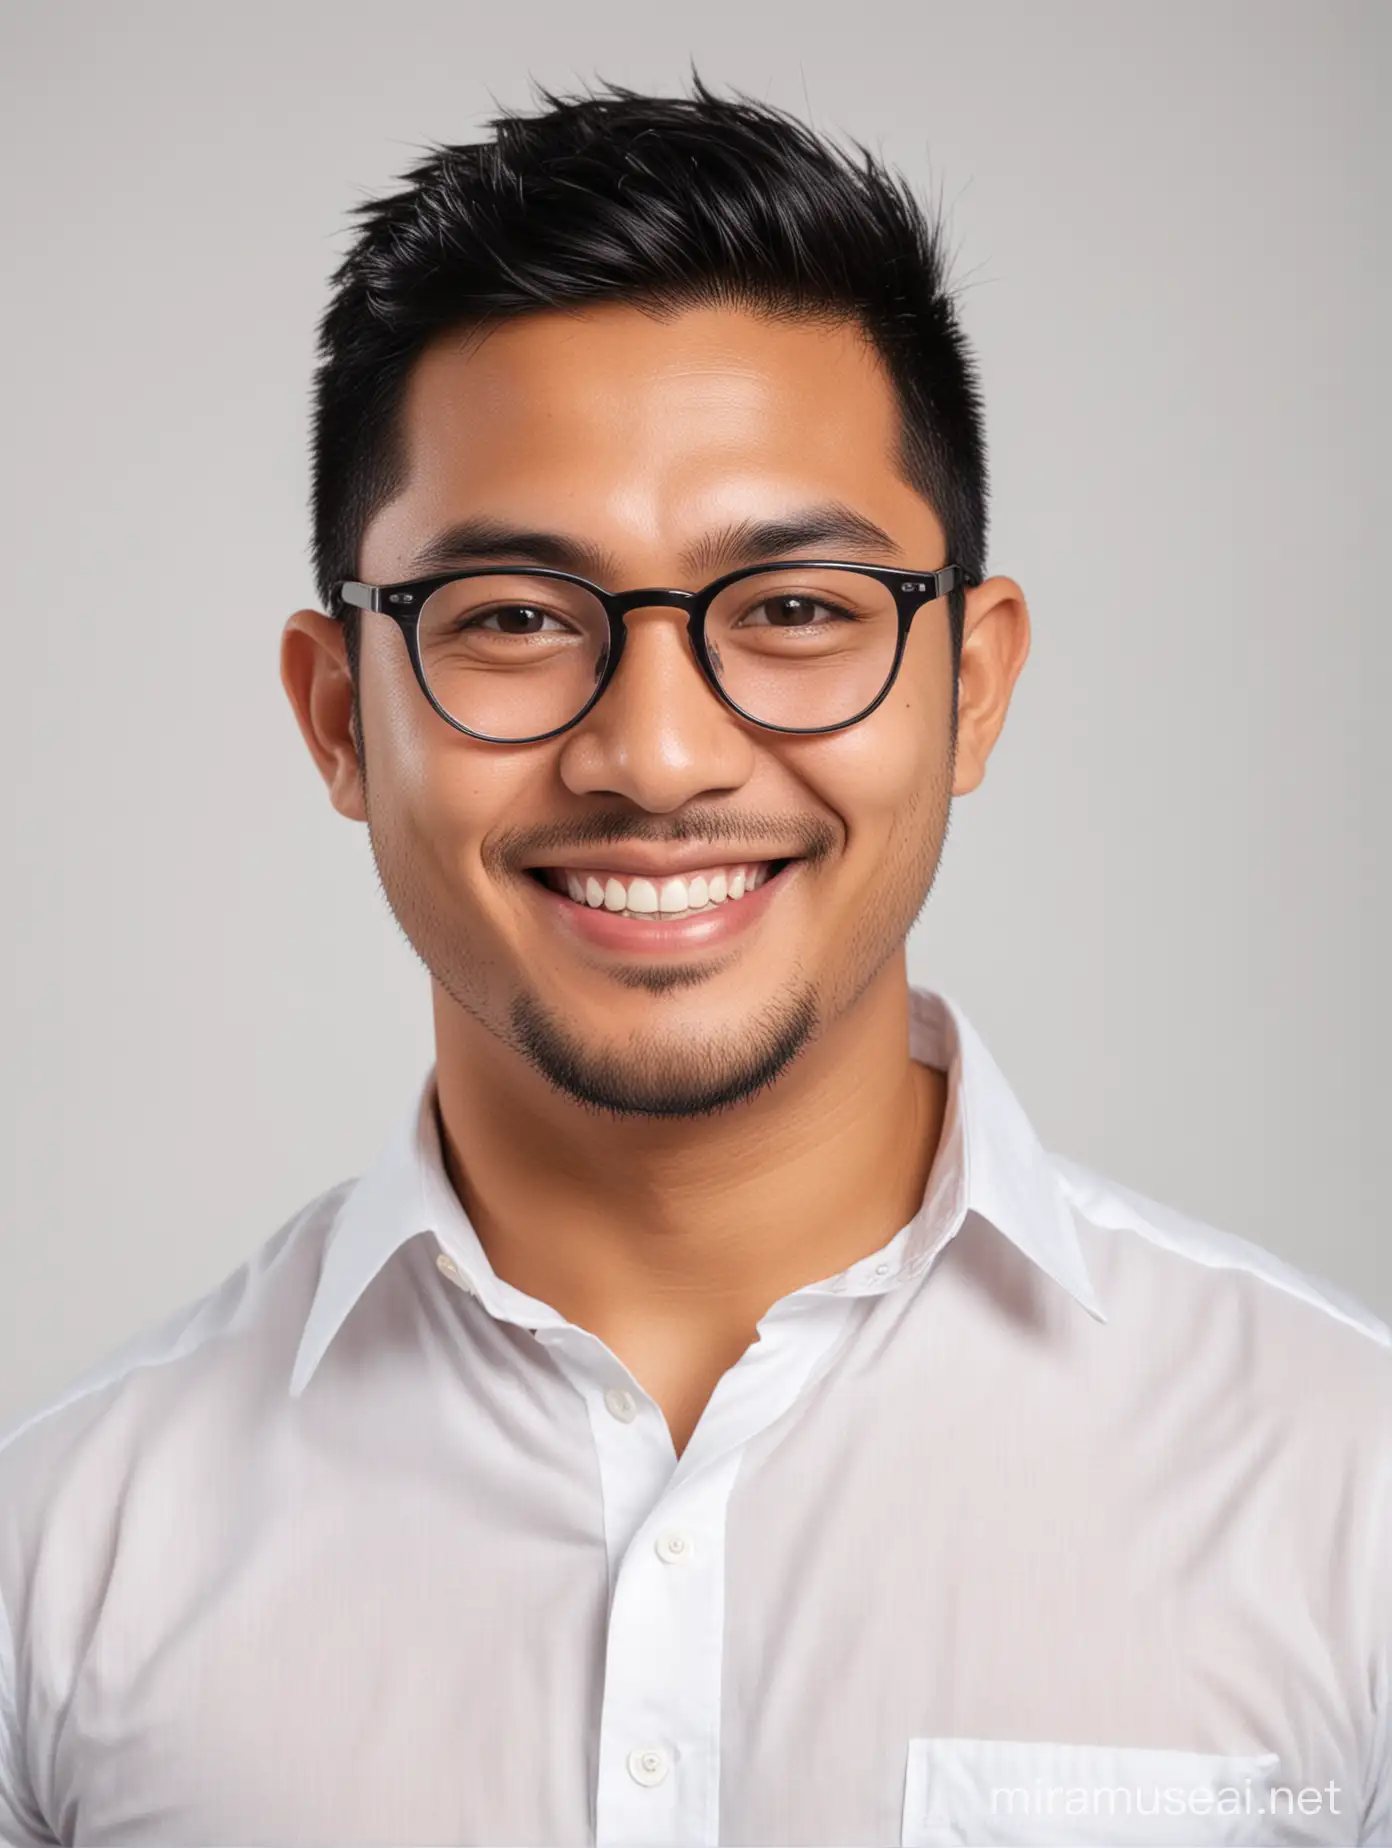 Smiling Indonesian Man Passport Photo on Clean White Background